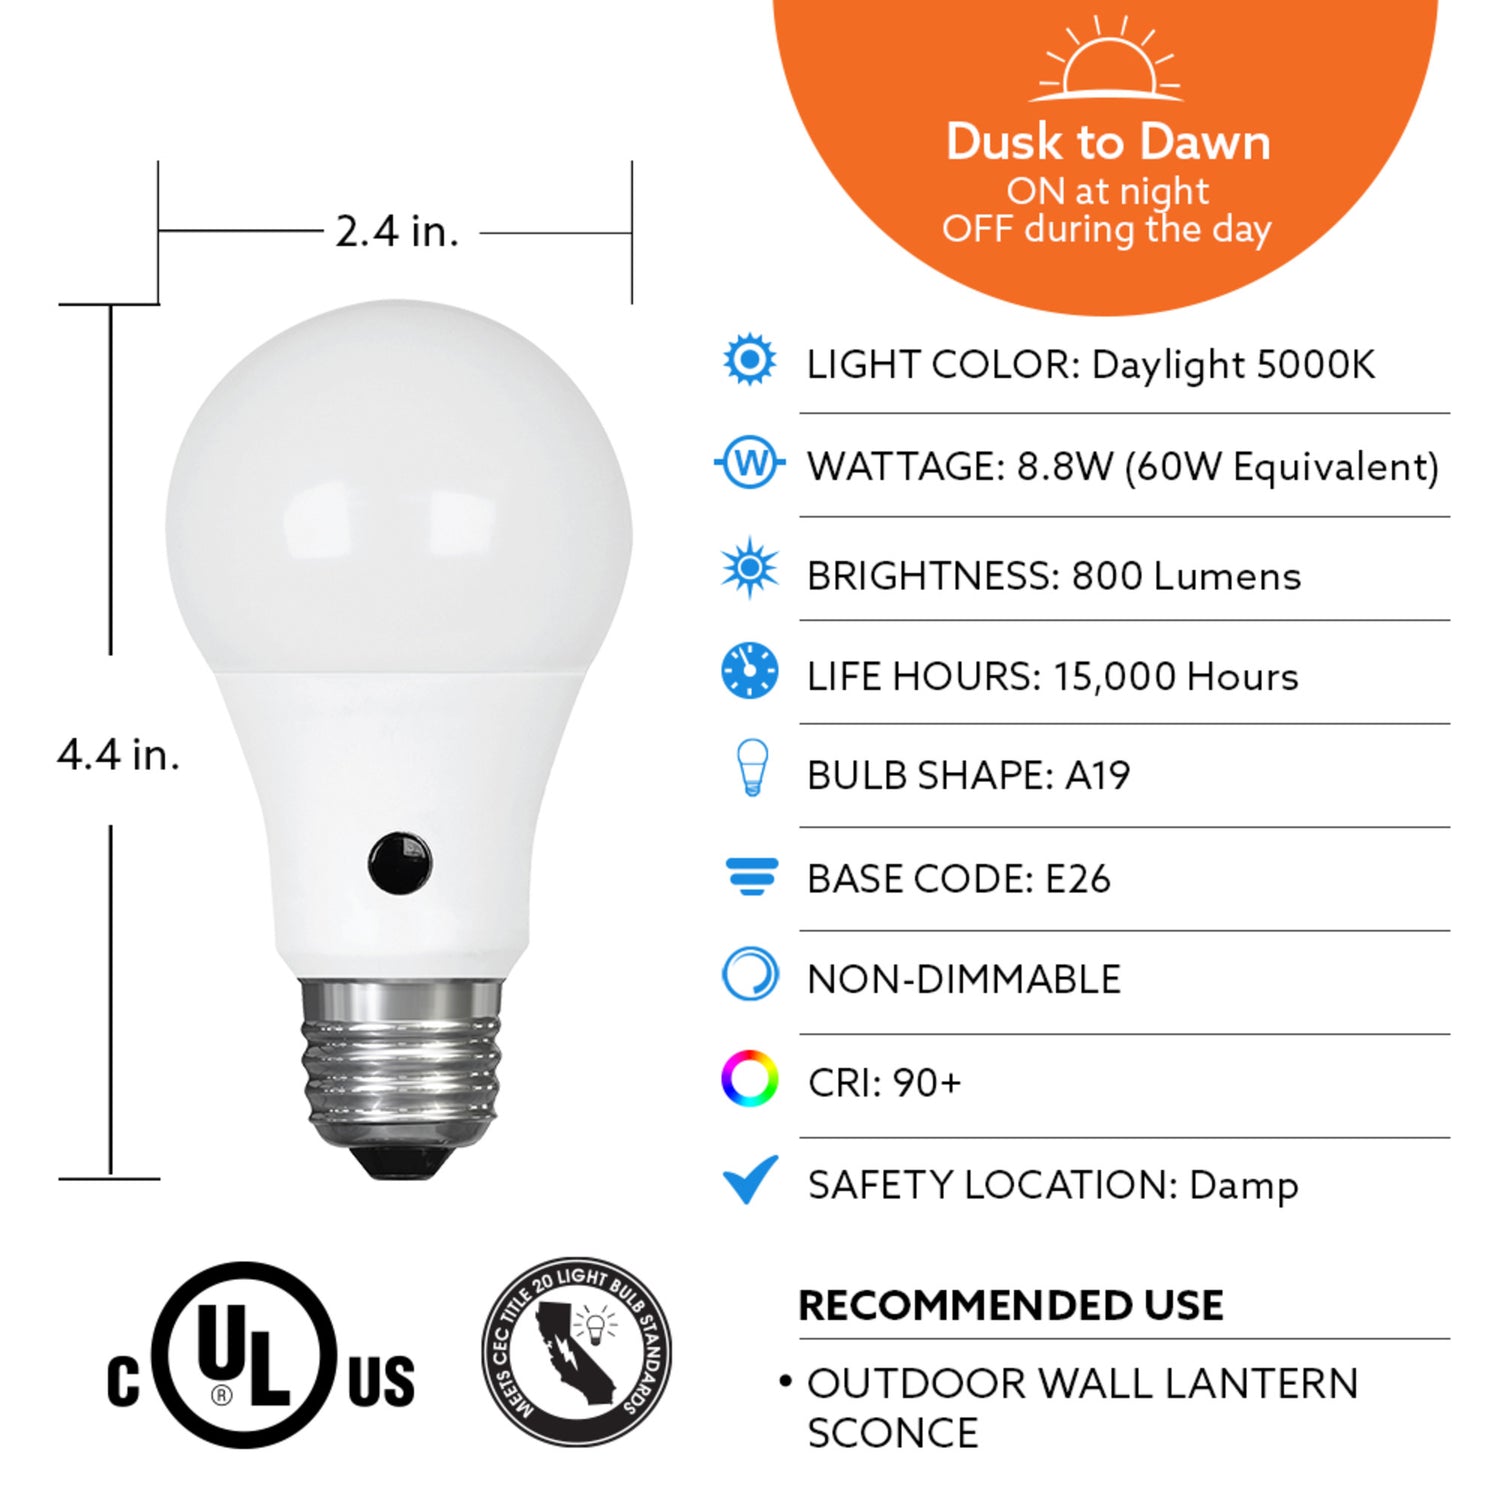 8.8W (60W Replacement) Daylight (5000K) A19 Dusk to Dawn LED